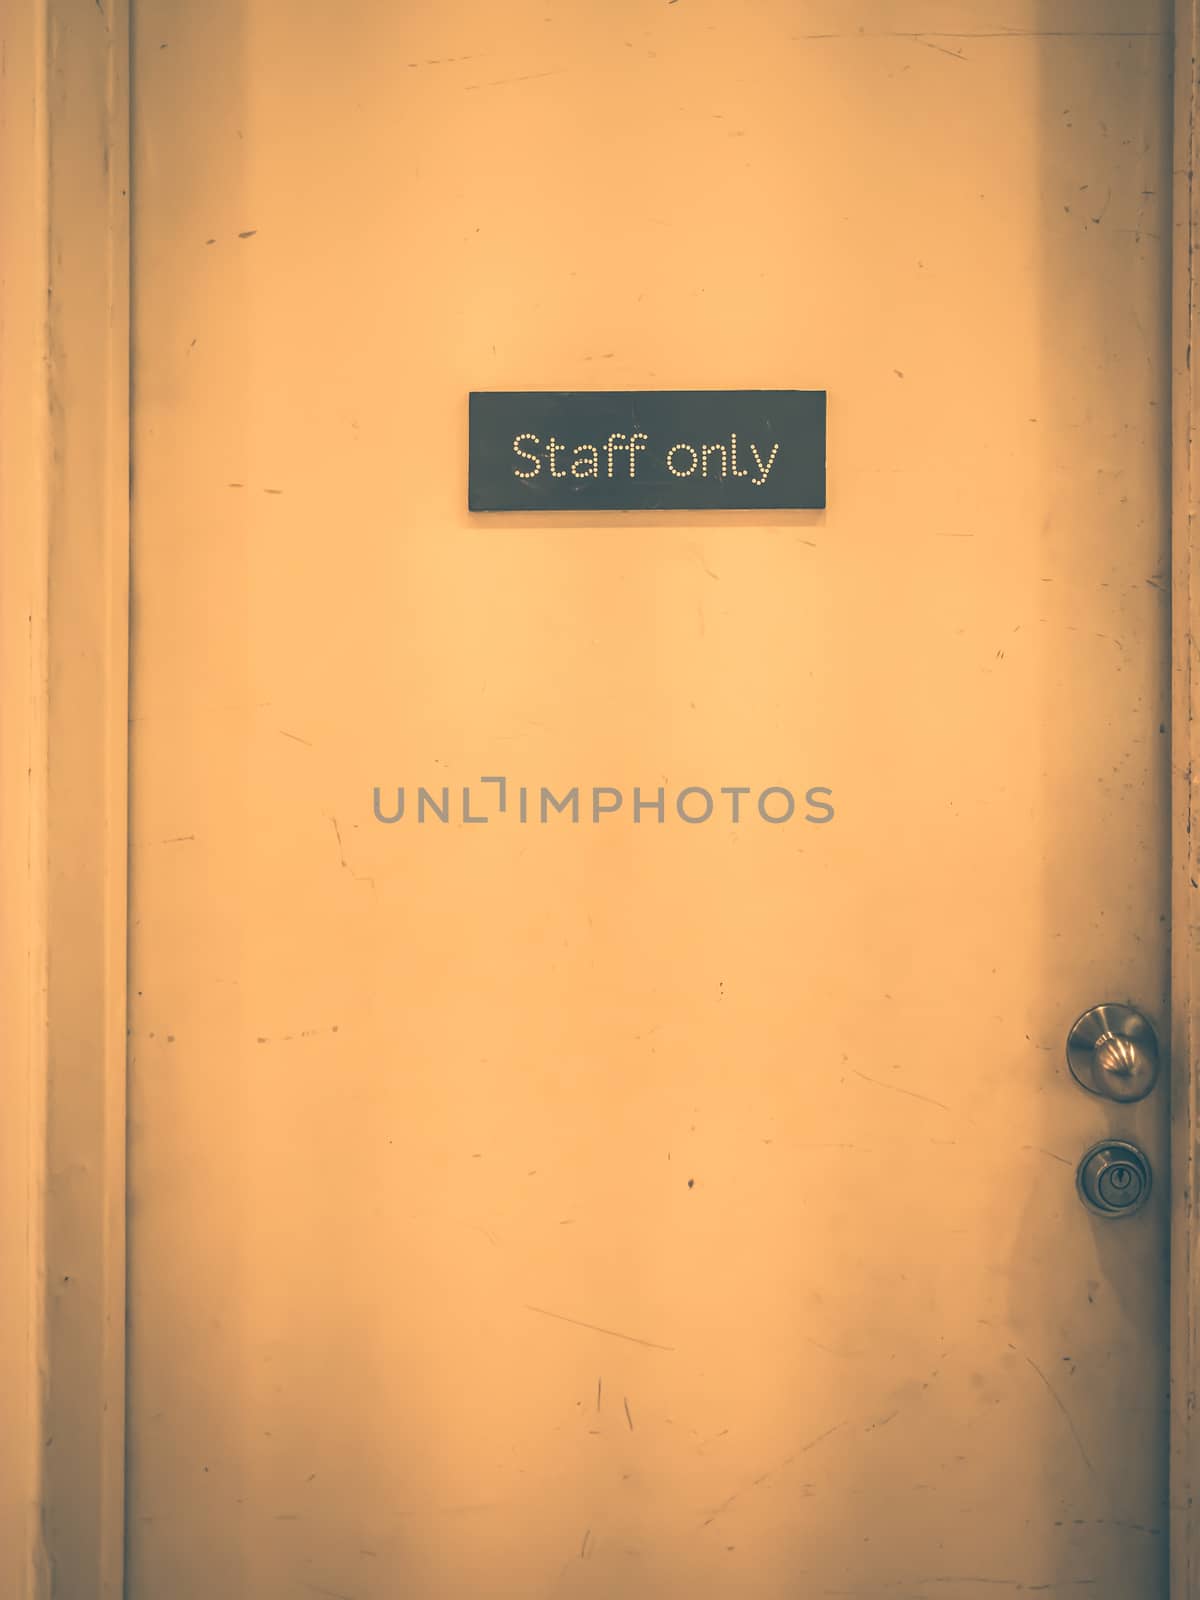 Staff only sign on a old door. Vintage tone